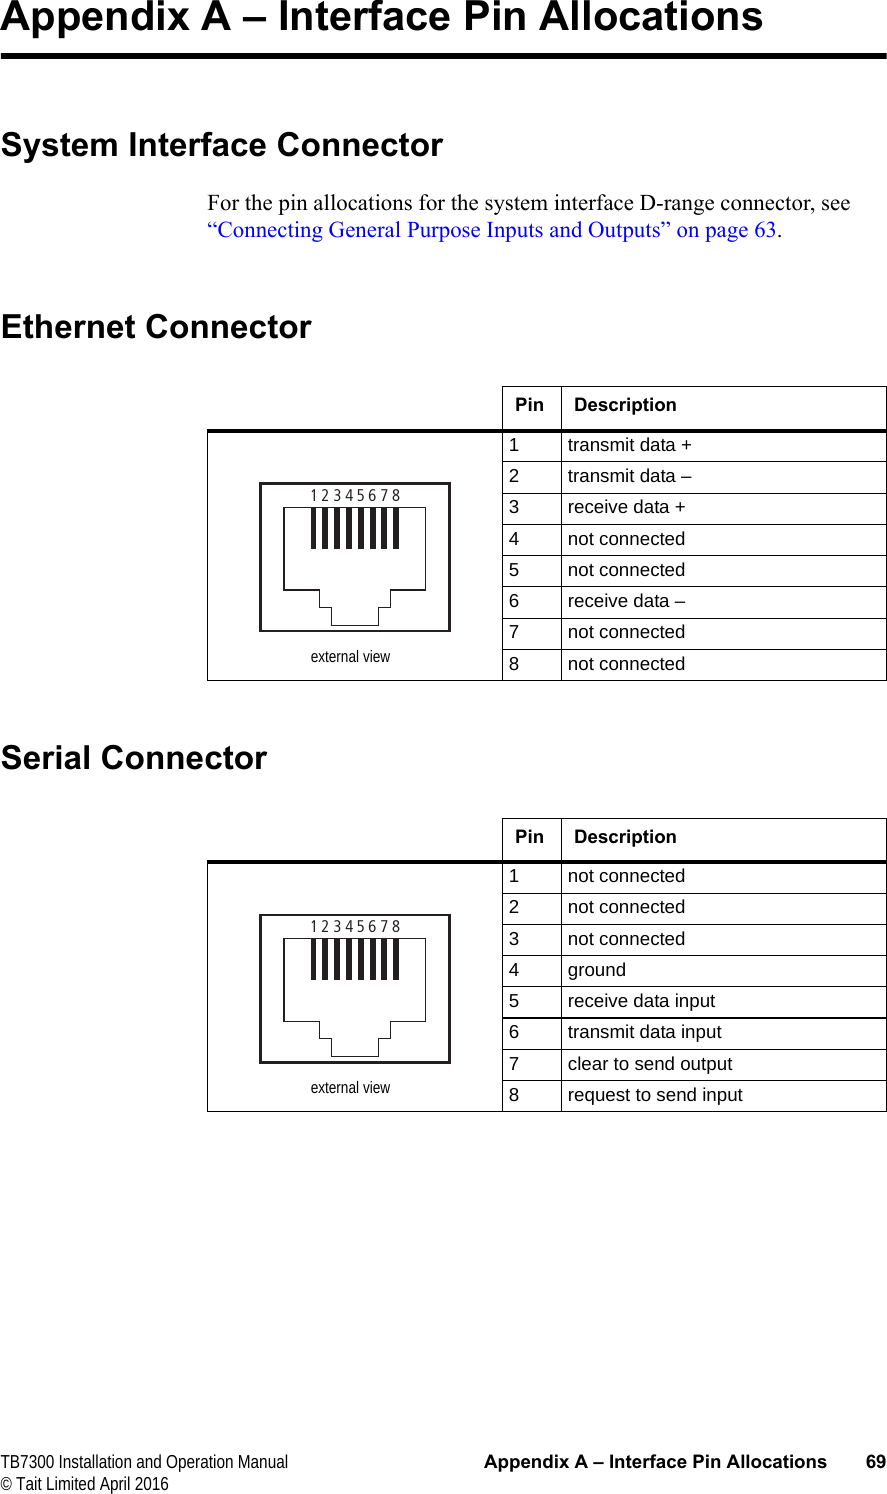  TB7300 Installation and Operation Manual Appendix A – Interface Pin Allocations 69© Tait Limited April 2016Appendix A – Interface Pin AllocationsSystem Interface ConnectorFor the pin allocations for the system interface D-range connector, see “Connecting General Purpose Inputs and Outputs” on page 63.Ethernet ConnectorSerial ConnectorPin Description1 transmit data +2 transmit data –3 receive data +4 not connected5 not connected6 receive data –7 not connected8 not connected12345678external viewPin Description1 not connected2 not connected3 not connected4 ground5 receive data input6 transmit data input7 clear to send output8 request to send input12345678external view